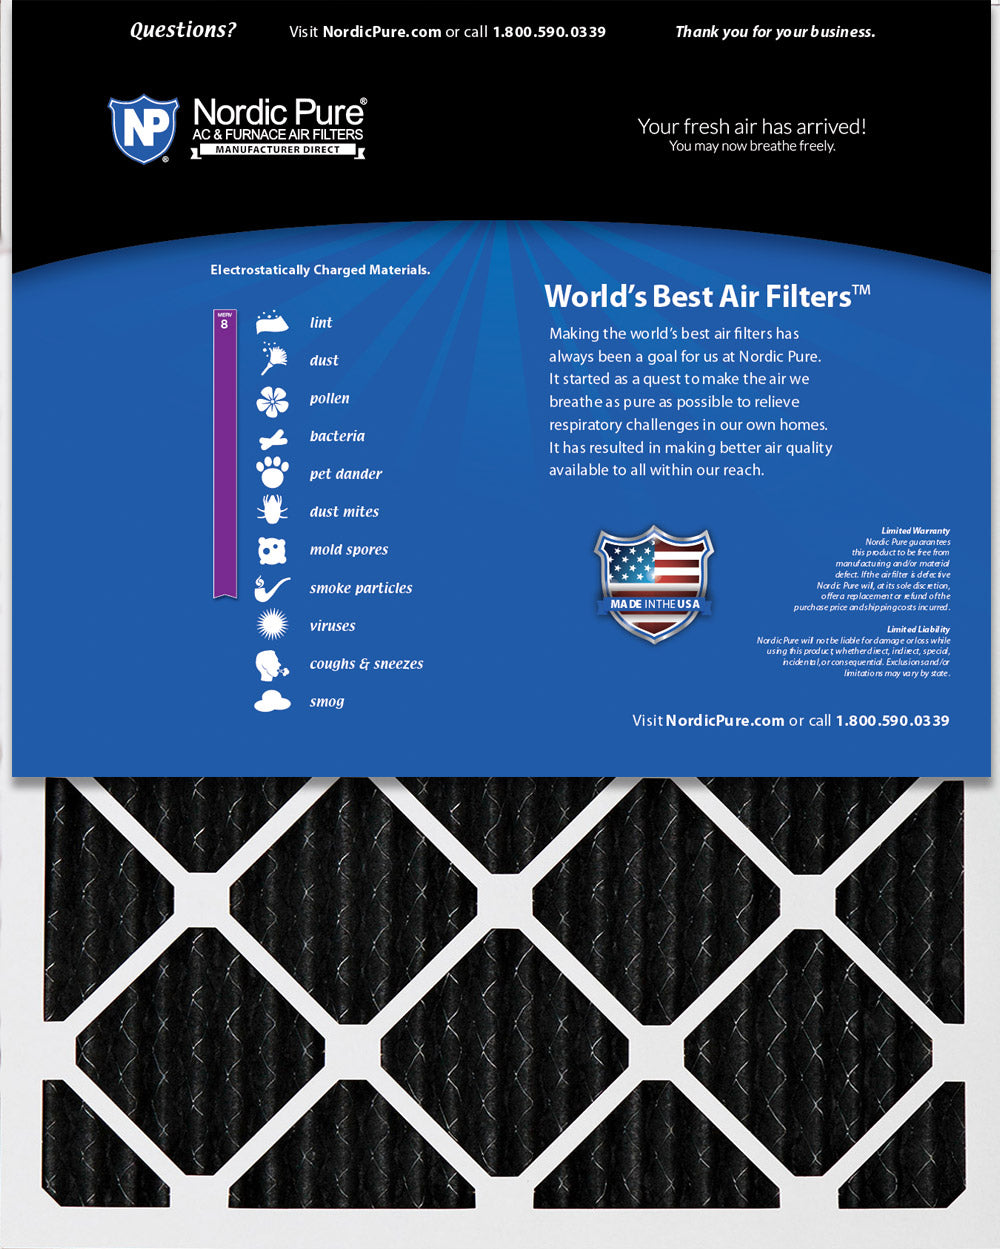 10x24x1 Pure Carbon Pleated Odor Reduction Furnace Air Filters